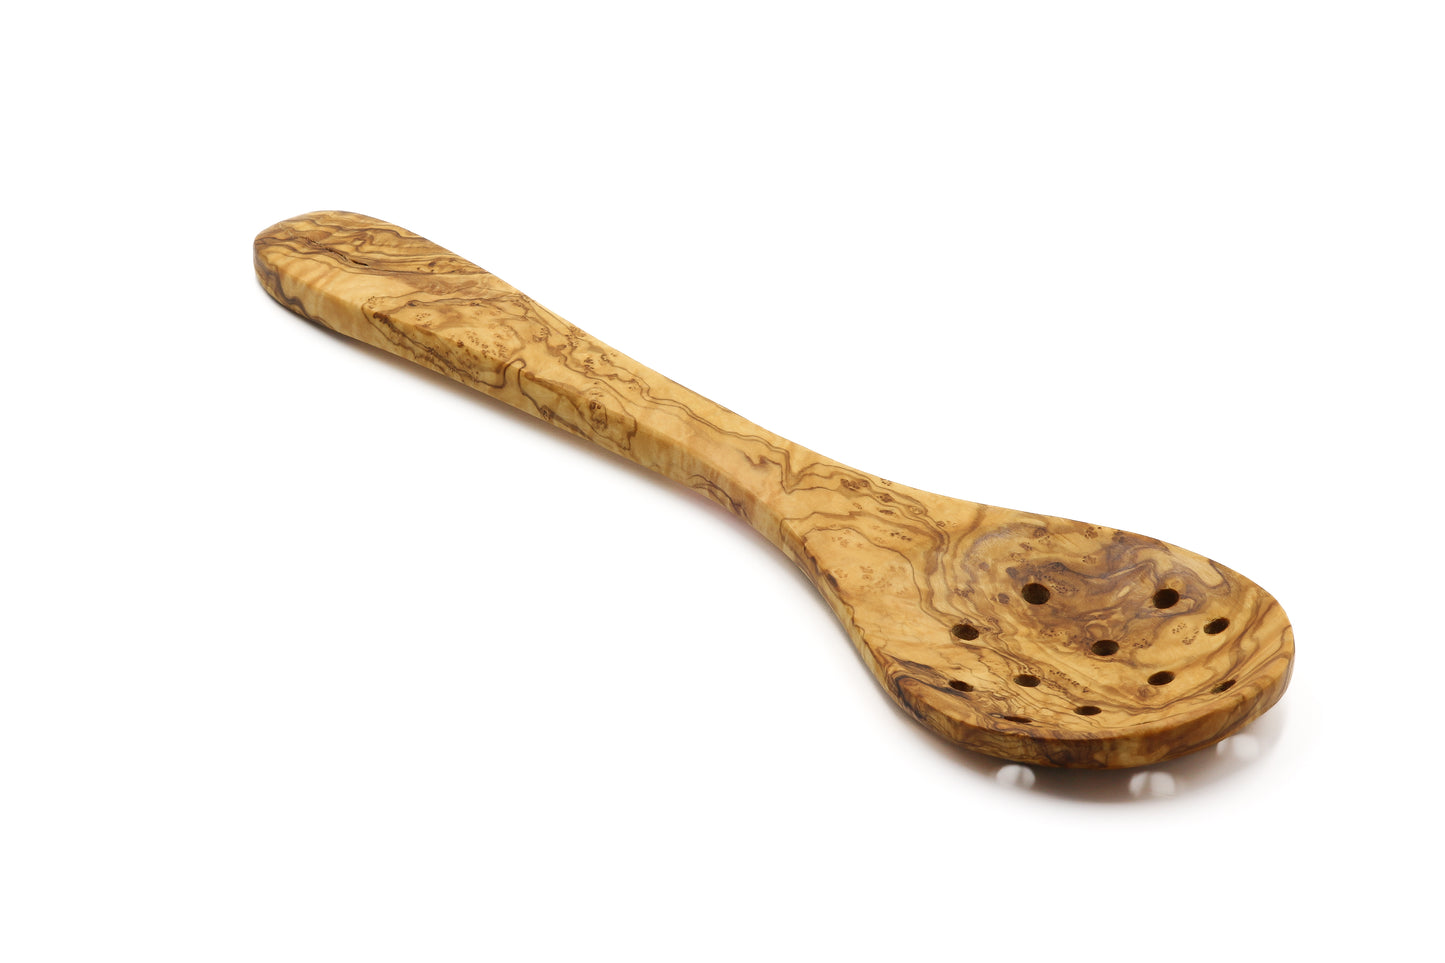 Olive wood perforated skimming spoon, strainer, and serving utensil